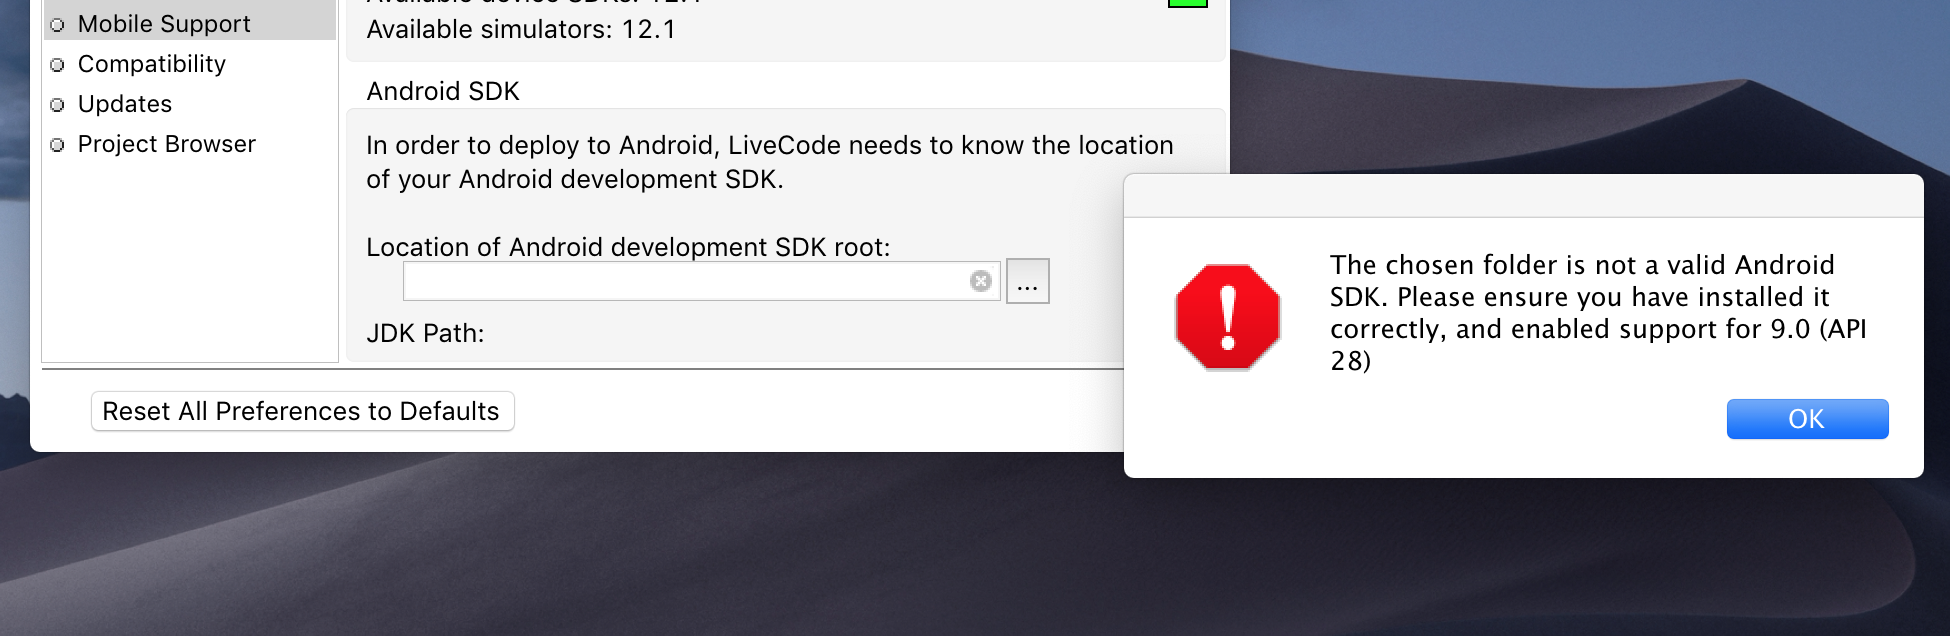 unable-to-locate-android-sdk-mac